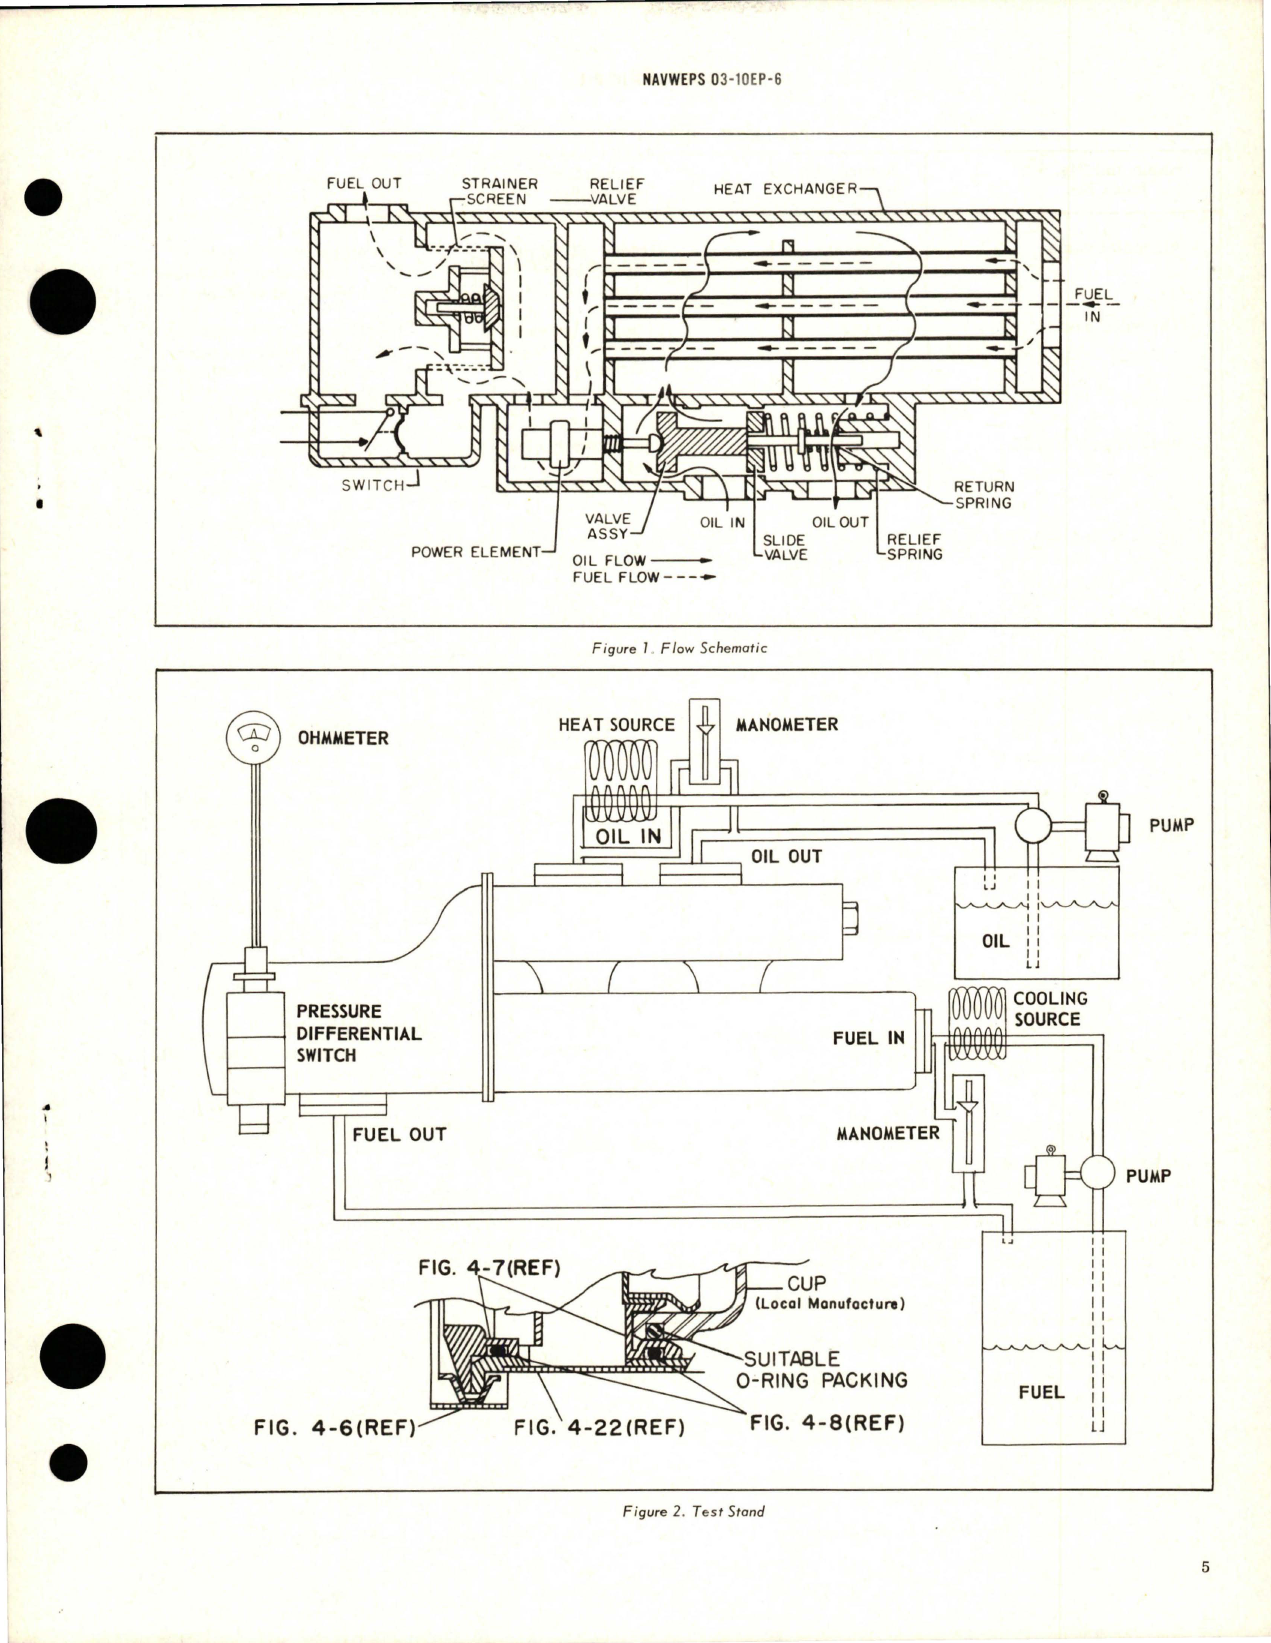 Sample page 5 from AirCorps Library document: Overhaul Instructions with Parts Breakdown for Fuel Heater and Strainer with By-Pass Indication - Parts UA524240-2, UA524240-3, and UA-524240-4